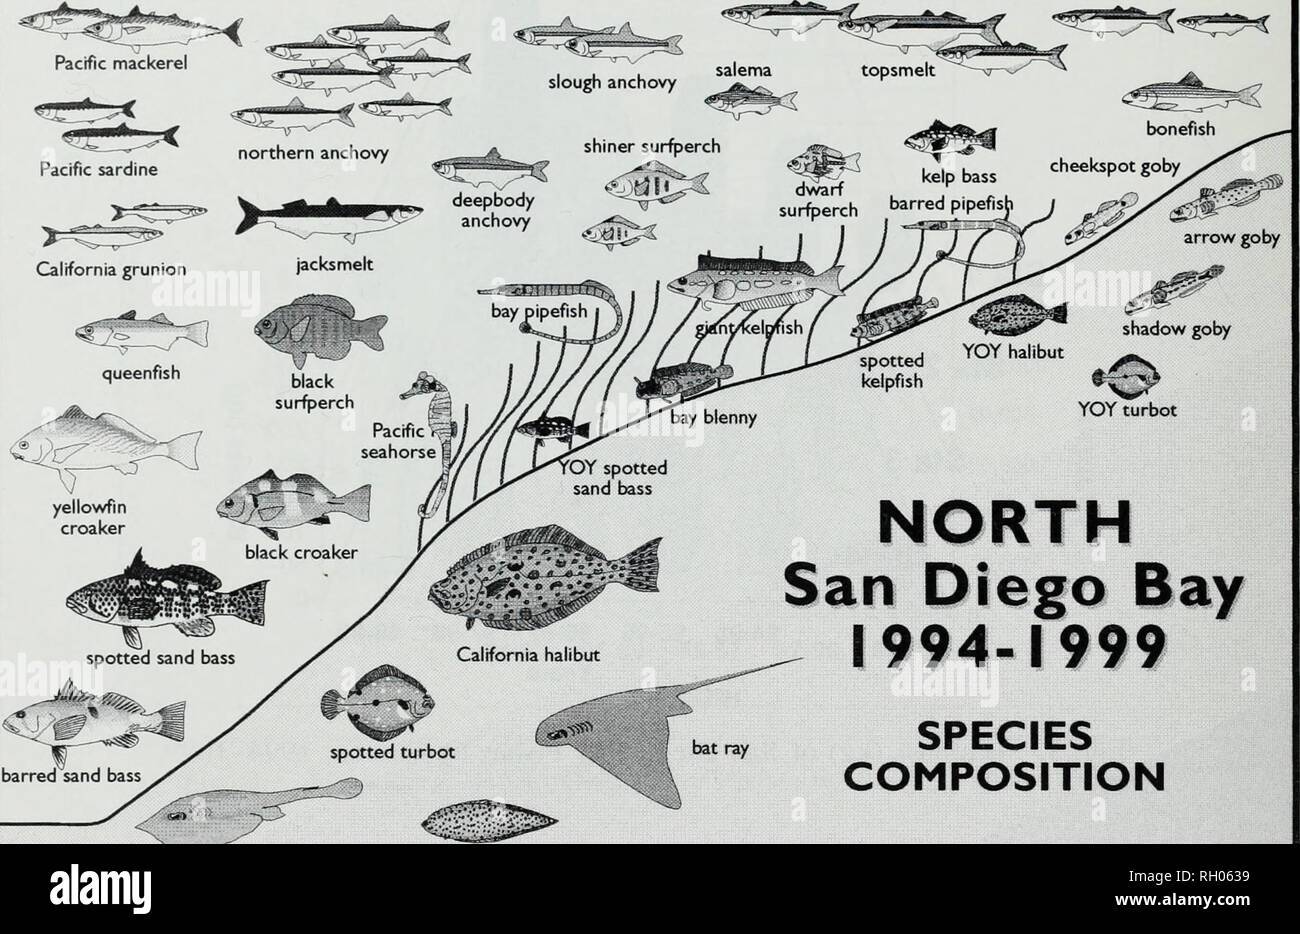 . Bulletin. Science. 62 SOUTHERN CALIFORNIA ACADEMY OF SCIENCES Pacific mackerel. NORTH San Diego Bay 1994-1999 SPECIES COMPOSITION round stingray California tonguefish Fig. 6. Diagrammatic representation of the common and distinctive species of fish which occurred in the northern portion (North and North Central Ecoregions) of San Diego Bay during the study period of July 1994 to April 1999. was, again, the most abundant fish species comprising over 66% of the total catch, followed by topsmelt at 14%, arrow goby at 3%, round stingray at also at 3%, and shiner surfperch at 2% of the total catc Stock Photo